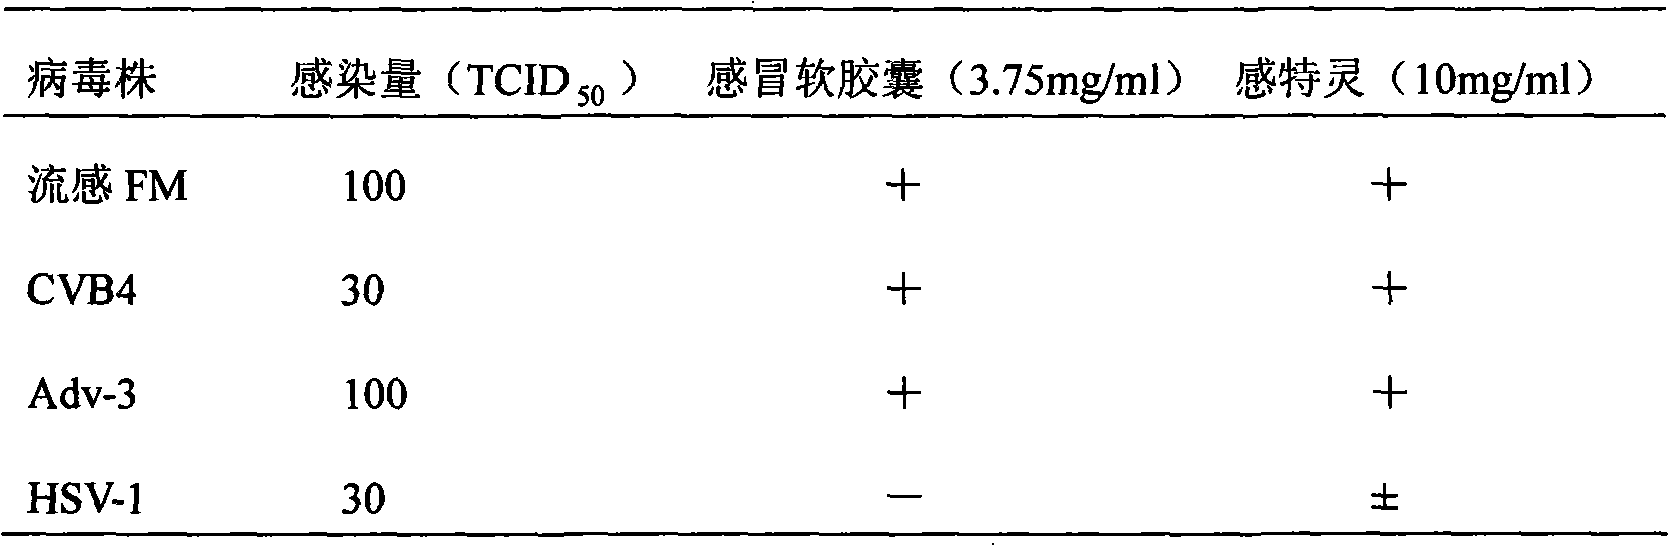 Pharmaceutical composition for treating cold